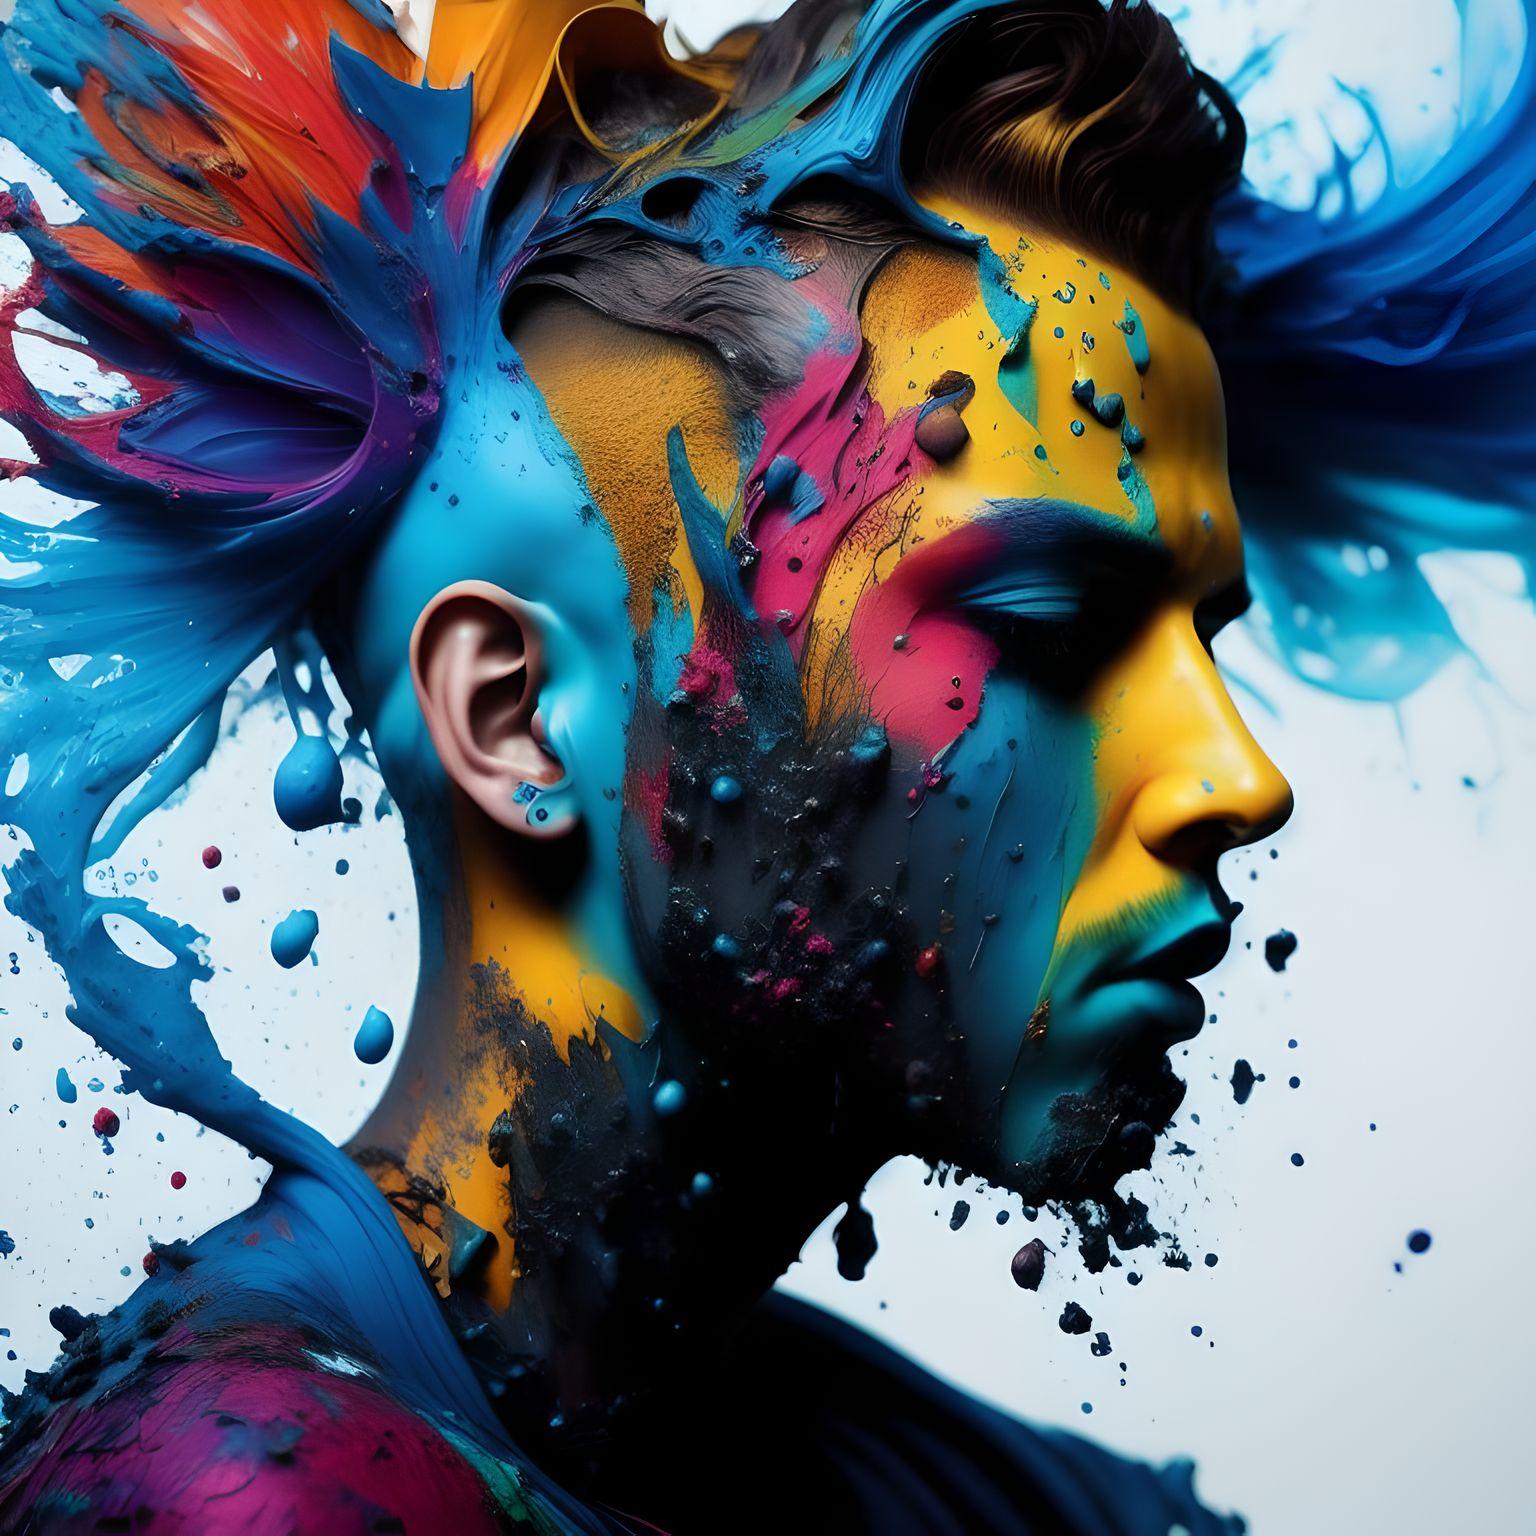 A man's side face in alberto seveso art style